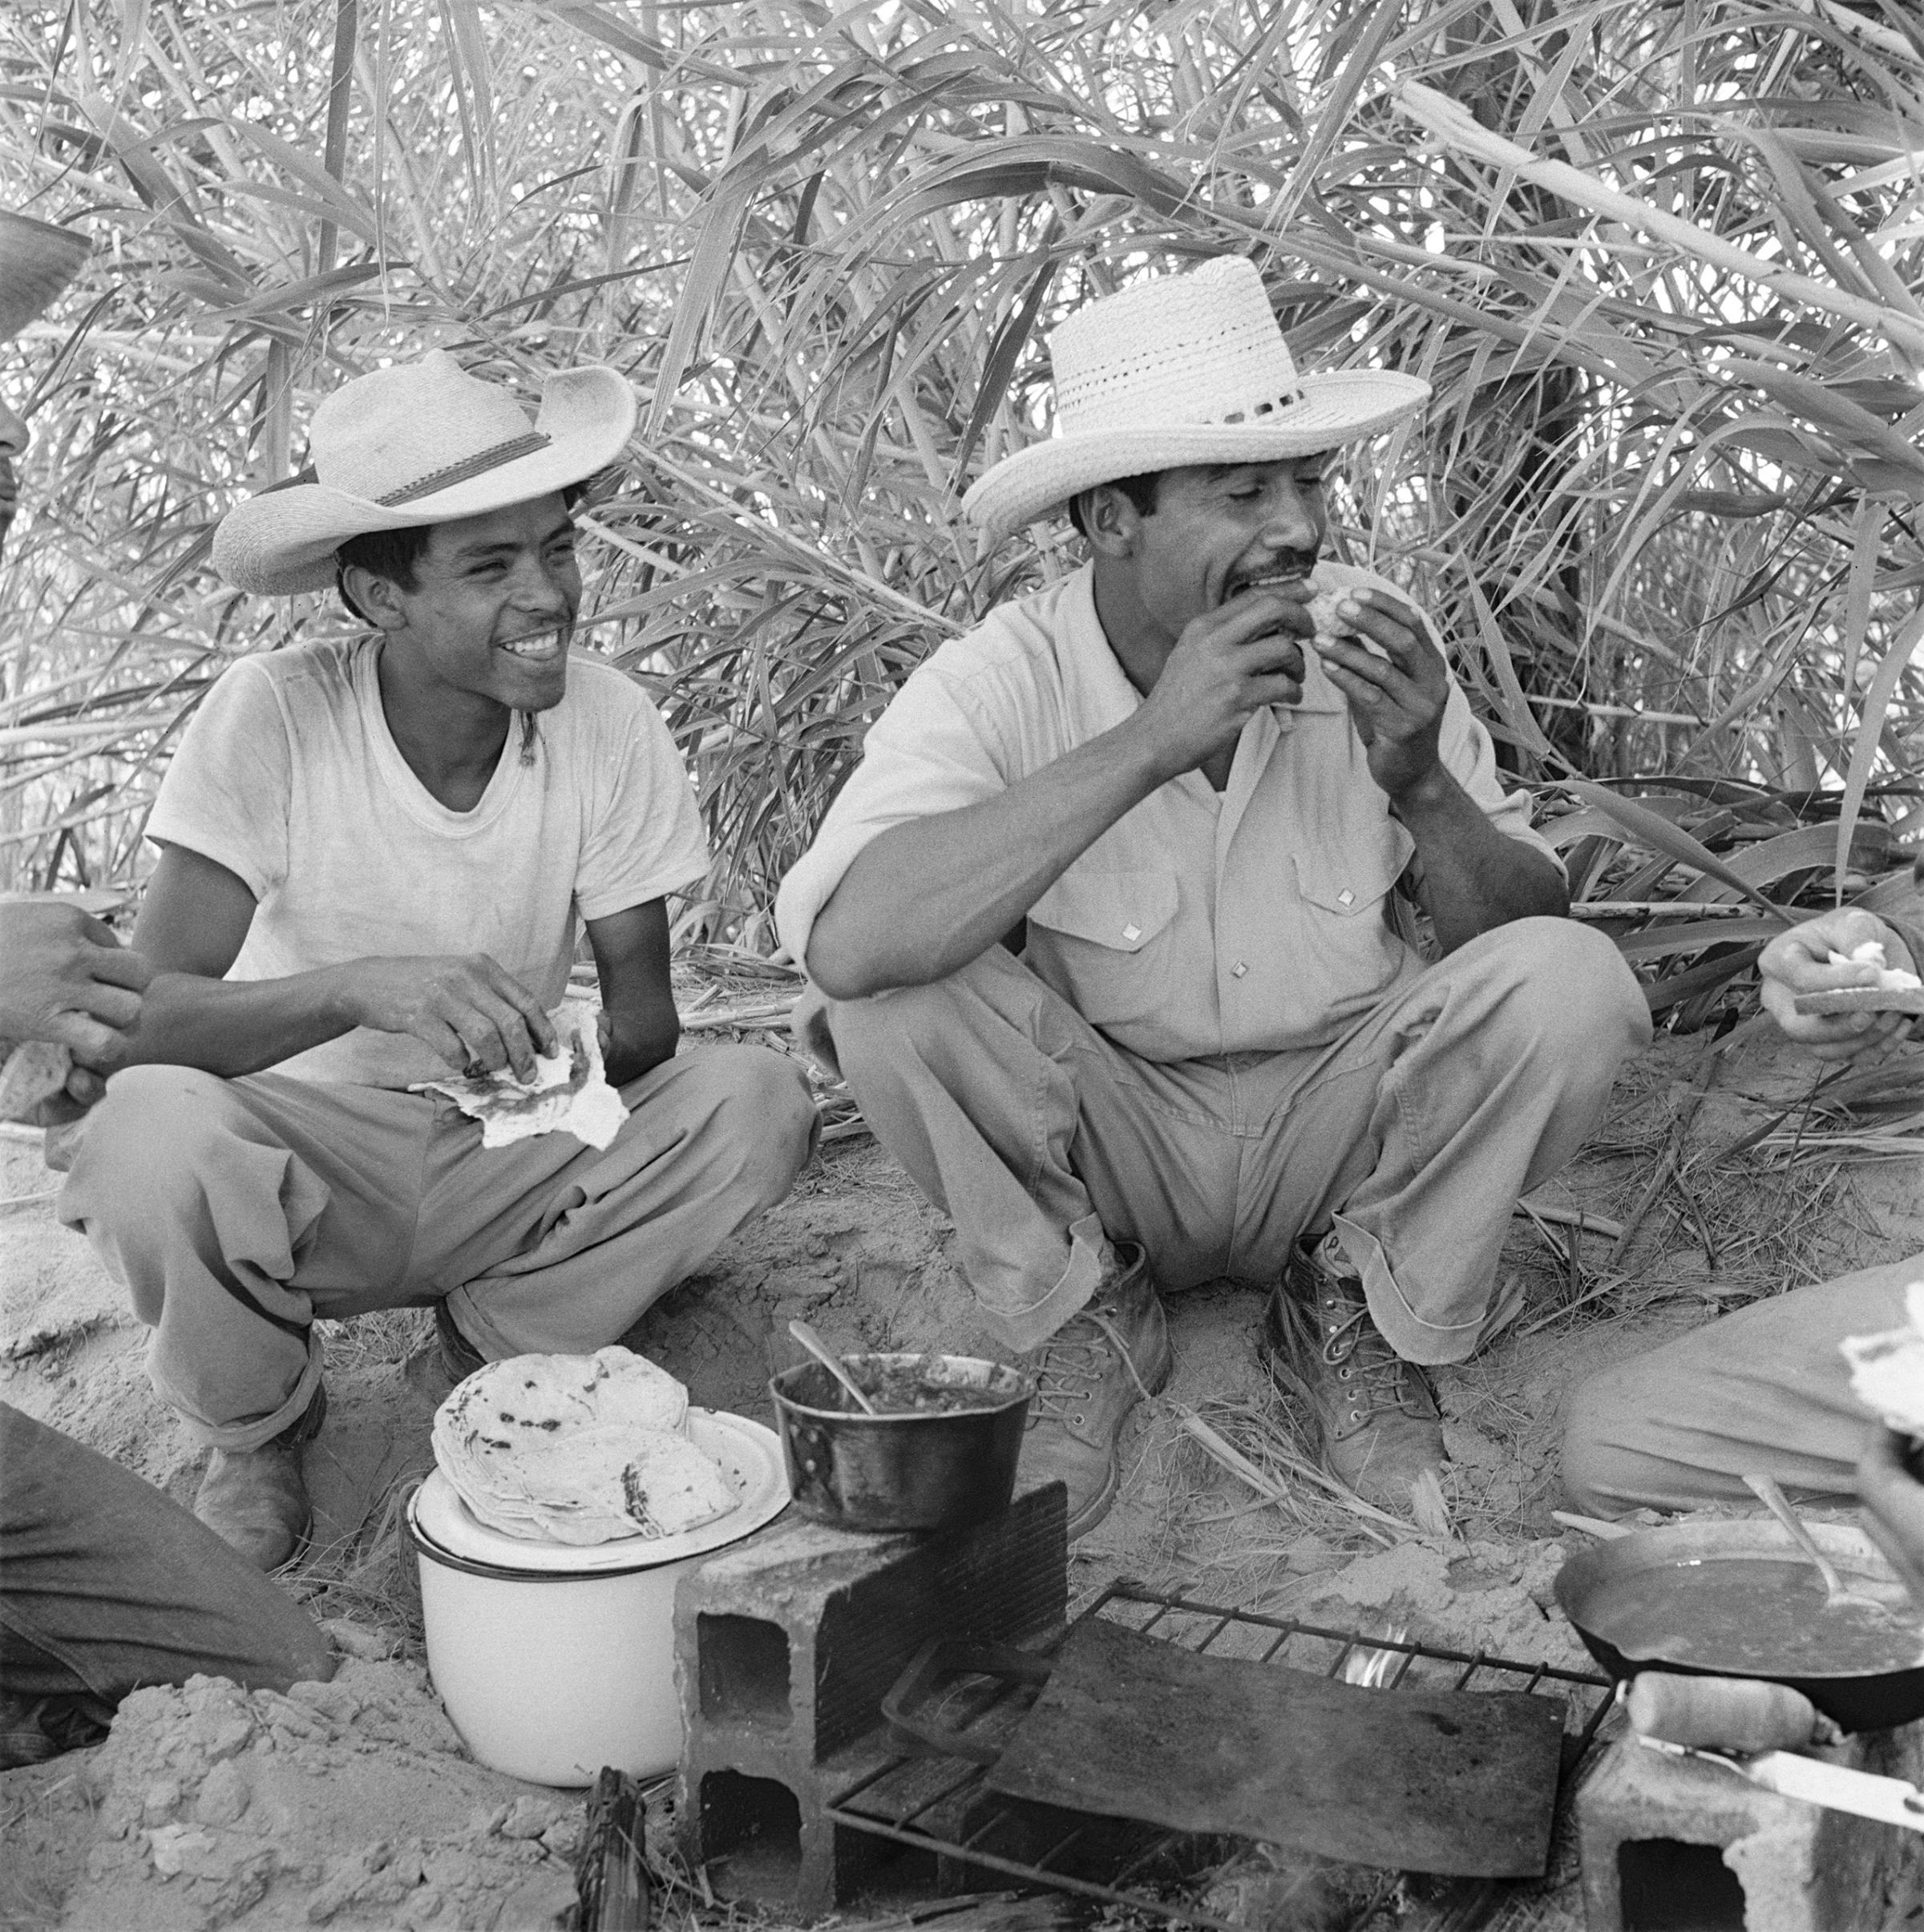 Tamayo and his fellow workers take a break for food during their work day on a ranch in California, 1957. Hands from Mexico" - The Saturday Evening Post - August 10, 1957 - volume 230, number 6)1957© 1978 Sid Avery